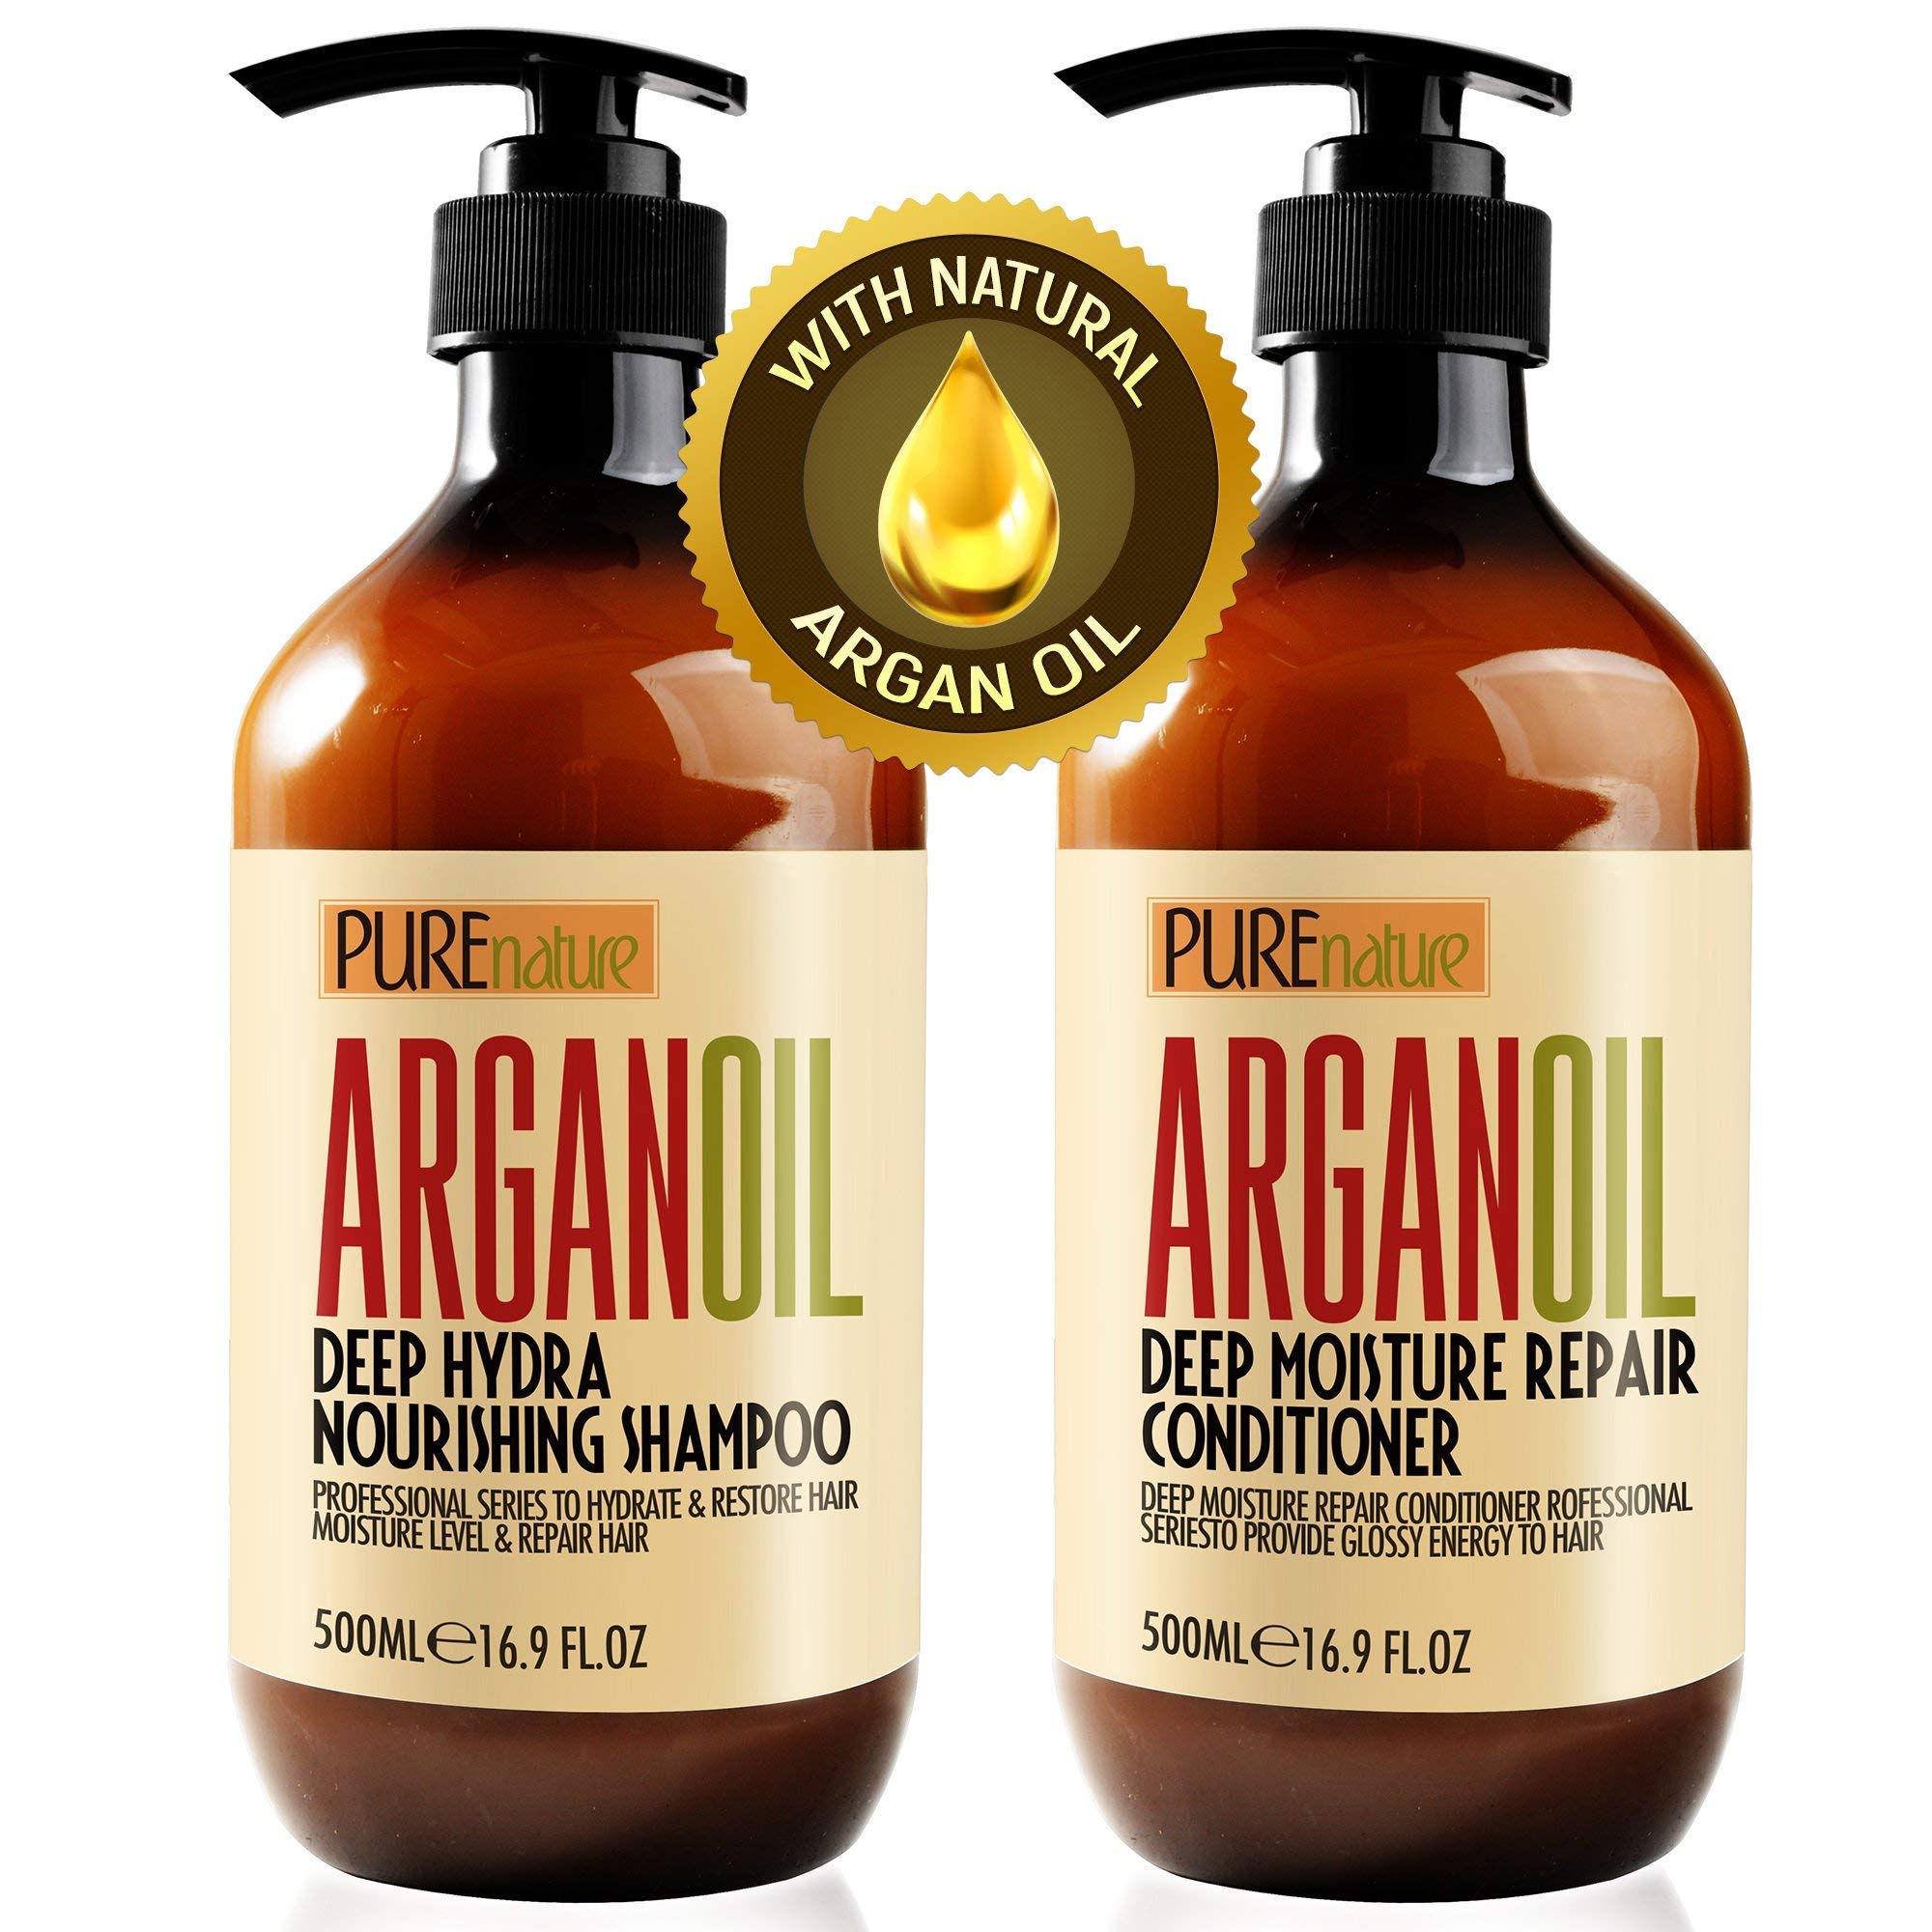 Moroccan Argan Oil Shampoo and Two Conditioners SLS Sulfate Free - Best for Damaged, Dry, Curly or Frizzy Hair - Thickening for Fine / Thin Hair, Safe for Color and Keratin Treated Hair